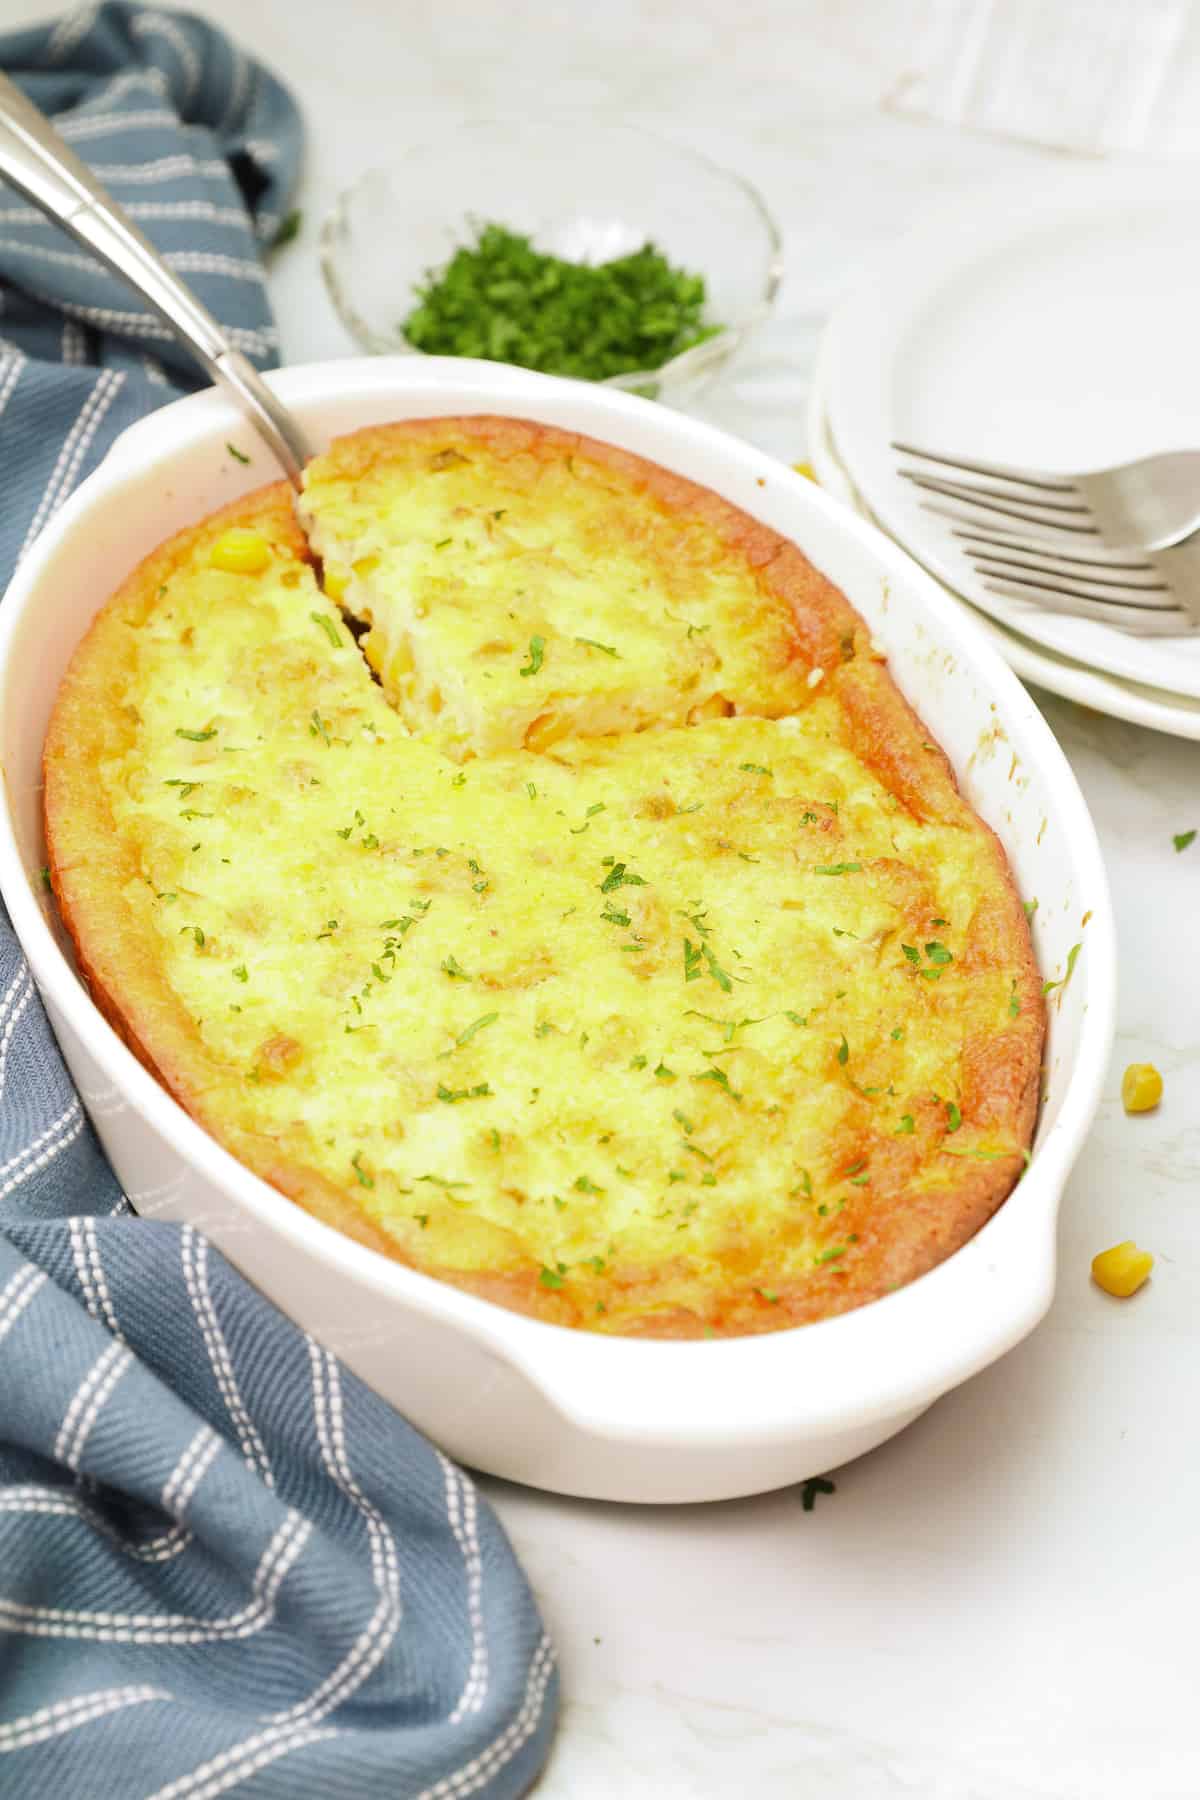 Enjoy buttery and creamy corn pudding